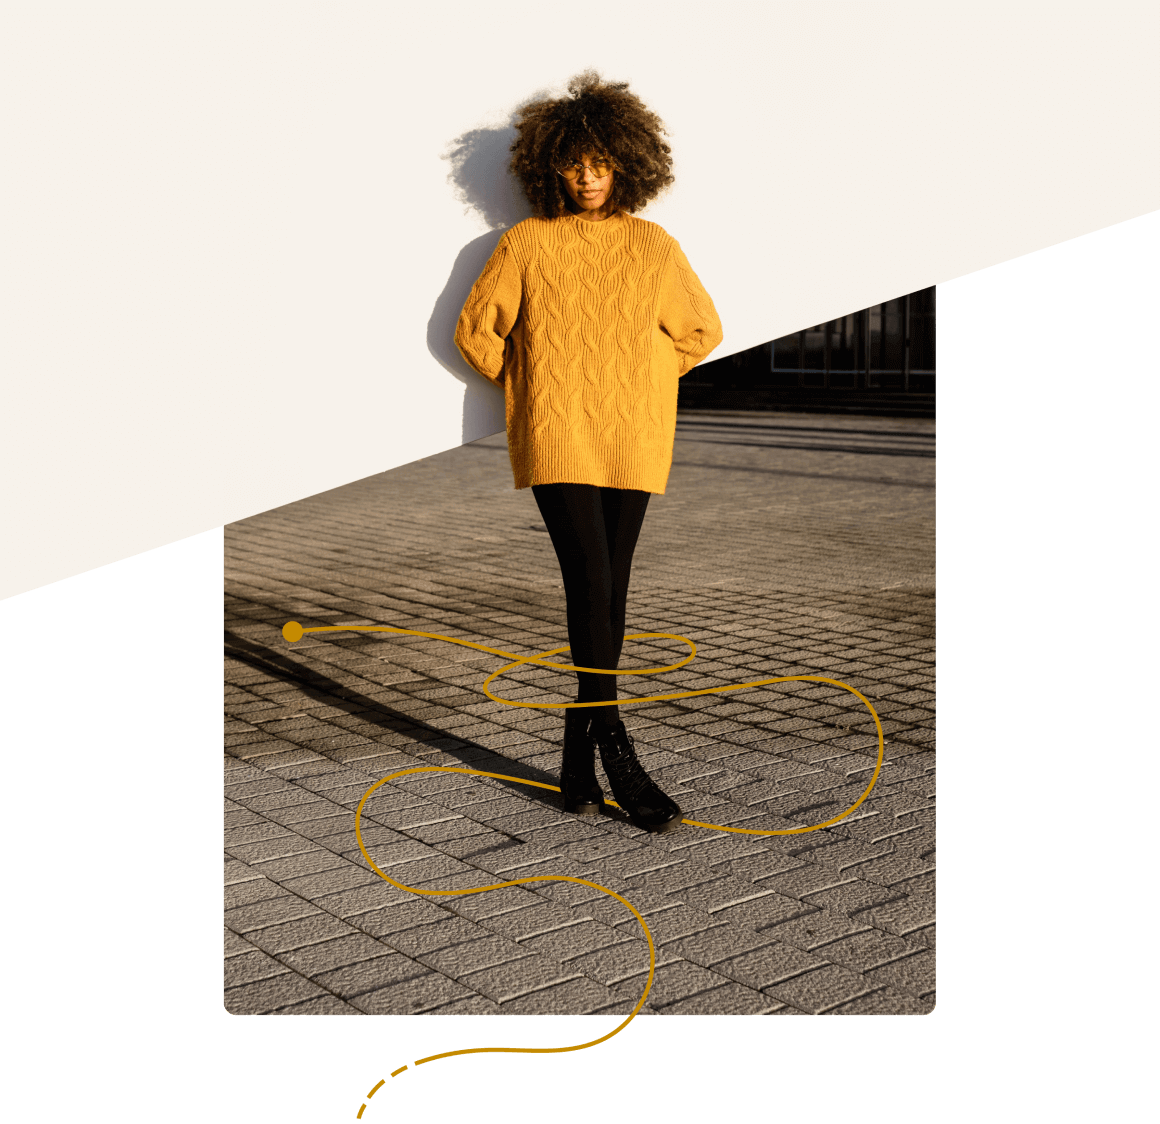 Gen-Z woman stands in yellow sweater ready to become a first-time homebuyer.